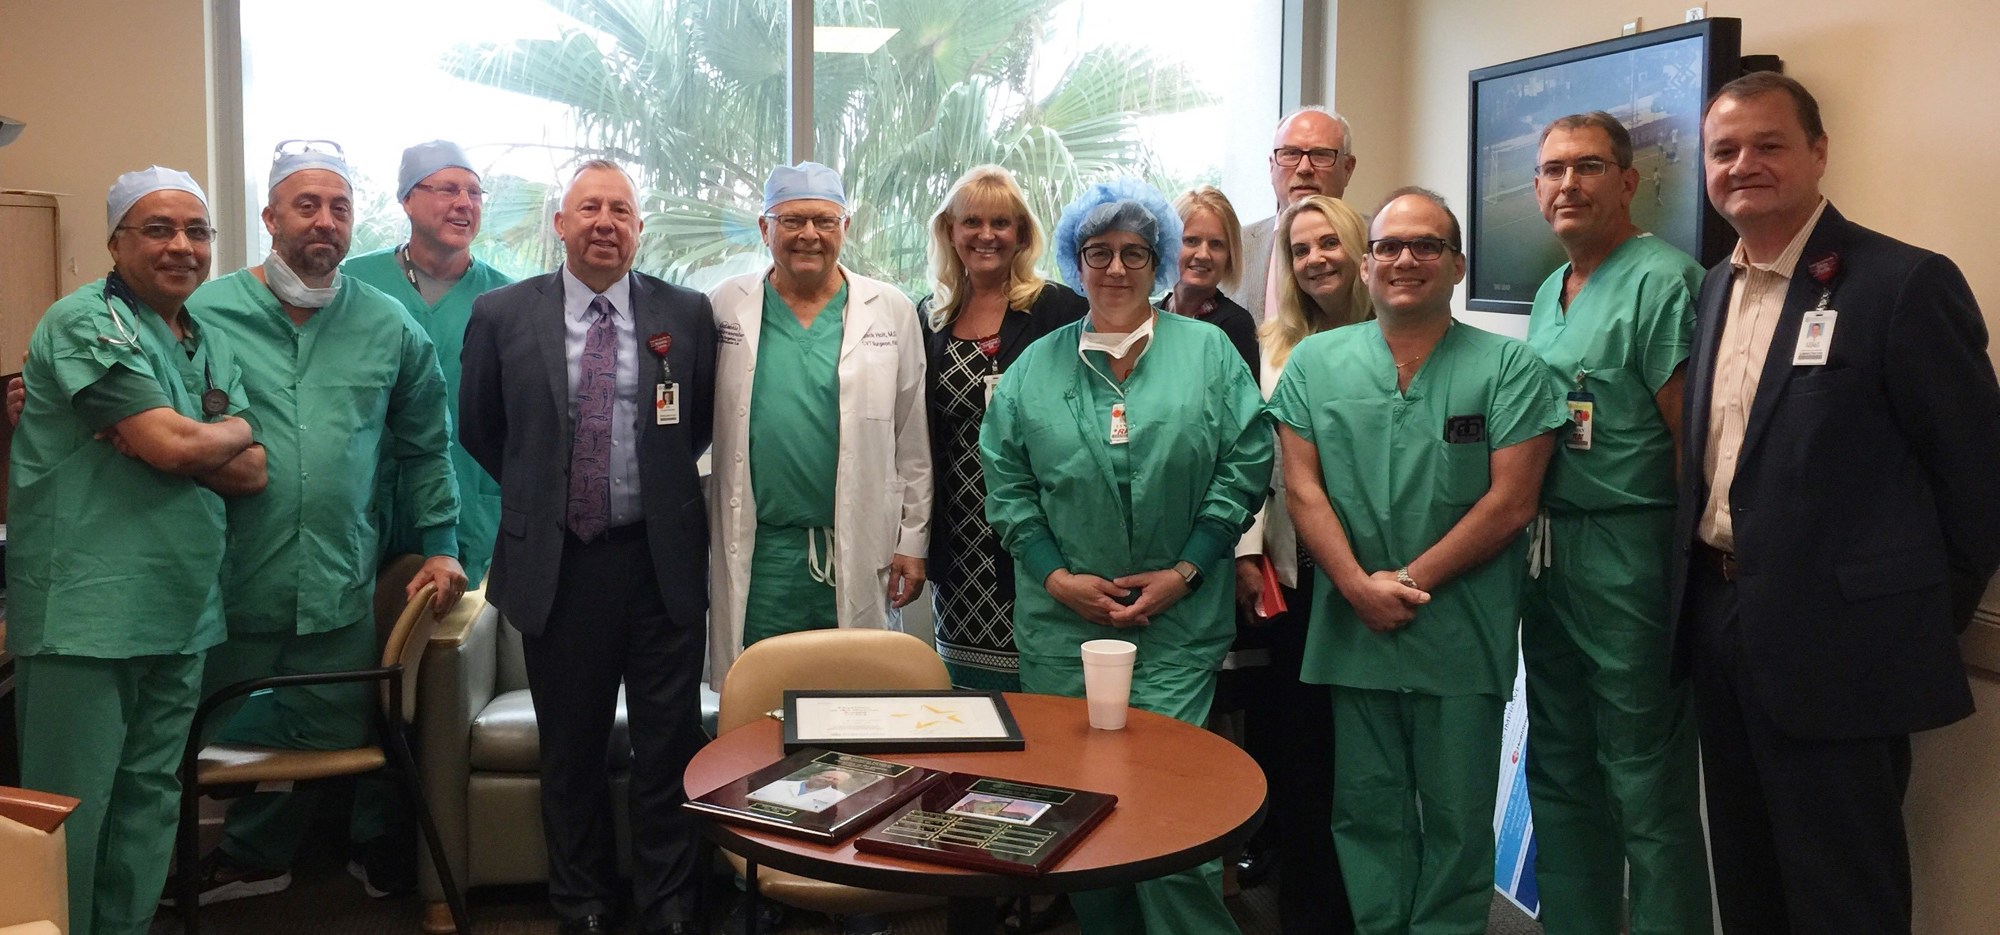 Cardiothoracic surgeon Dr. John Holt (white coat) was recognized as the physician of the quarter for Florida Hospital Memorial Medical Center. He is shown with the cardiovascular operating room team and hospital leadership. Courtesy photo